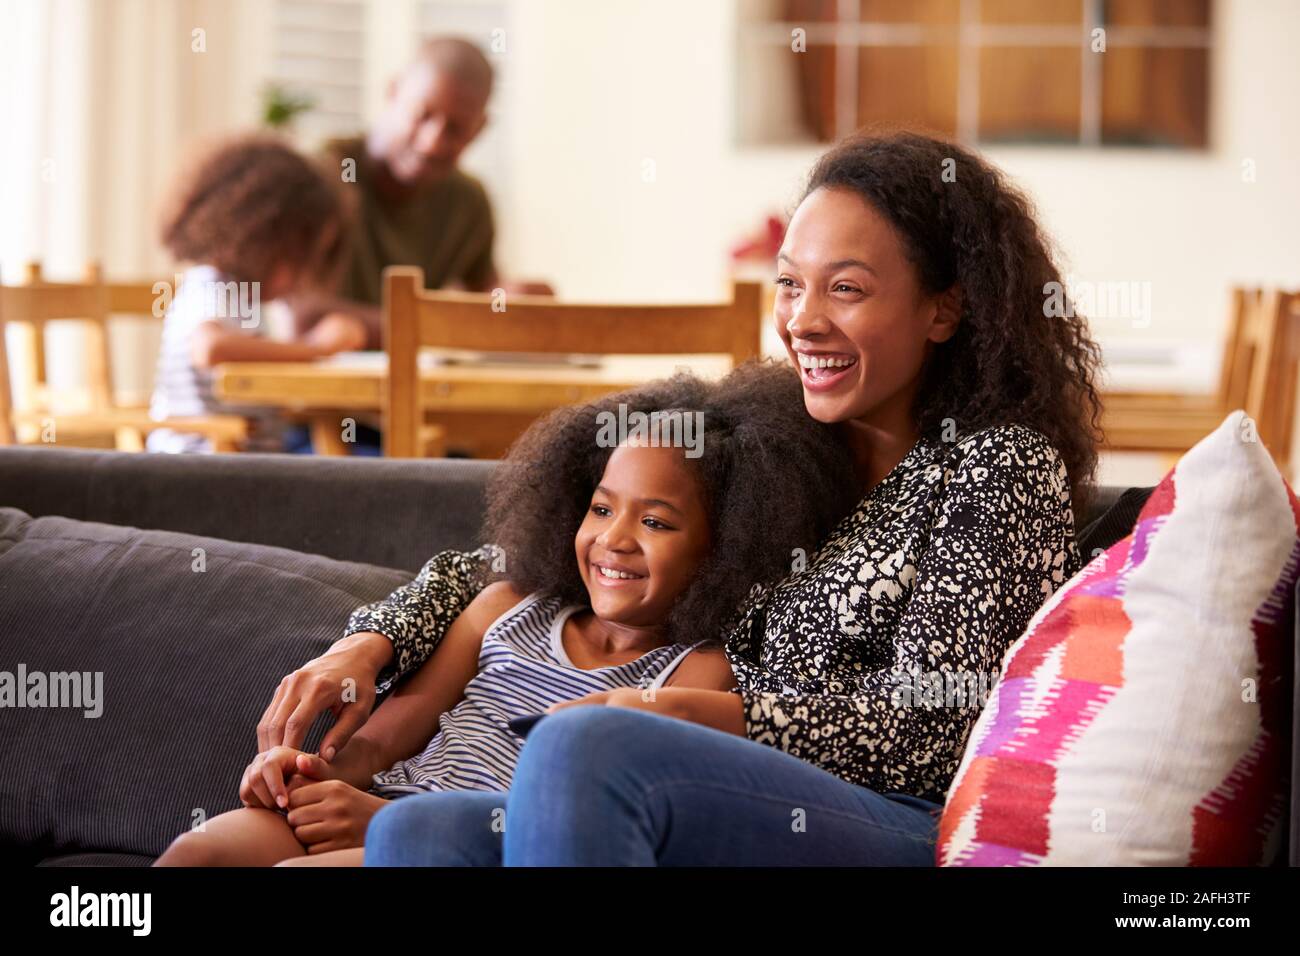 Mother And Daughter Sitting On Sofa At Home Watching Movie On TV Together Stock Photo